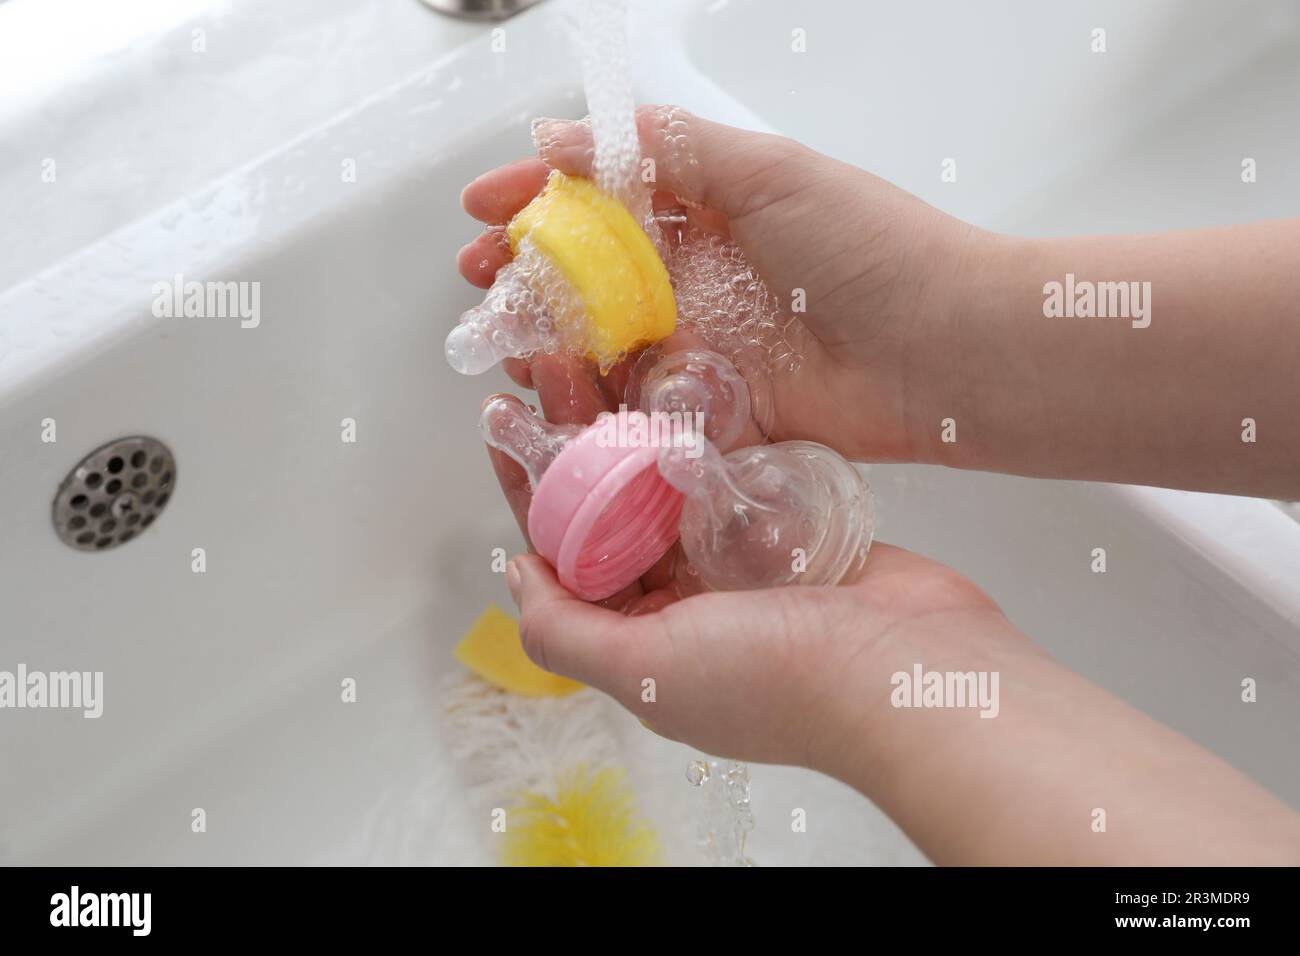 Woman washing baby bottle nipples under stream of water, above